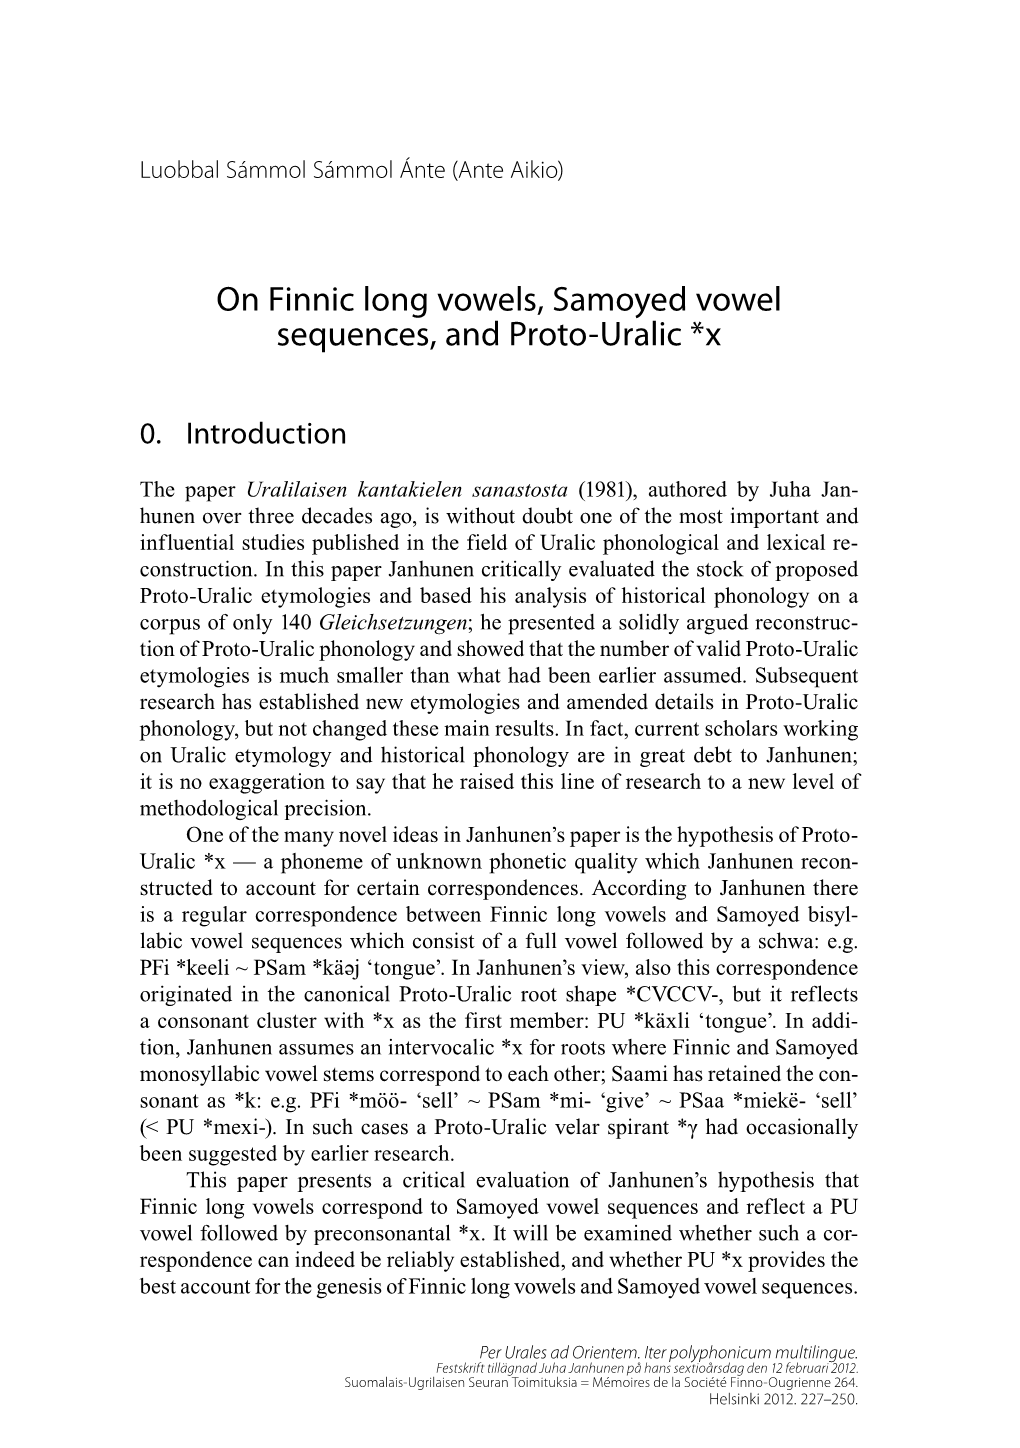 On Finnic Long Vowels, Samoyed Vowel Sequences, and Proto-Uralic *X